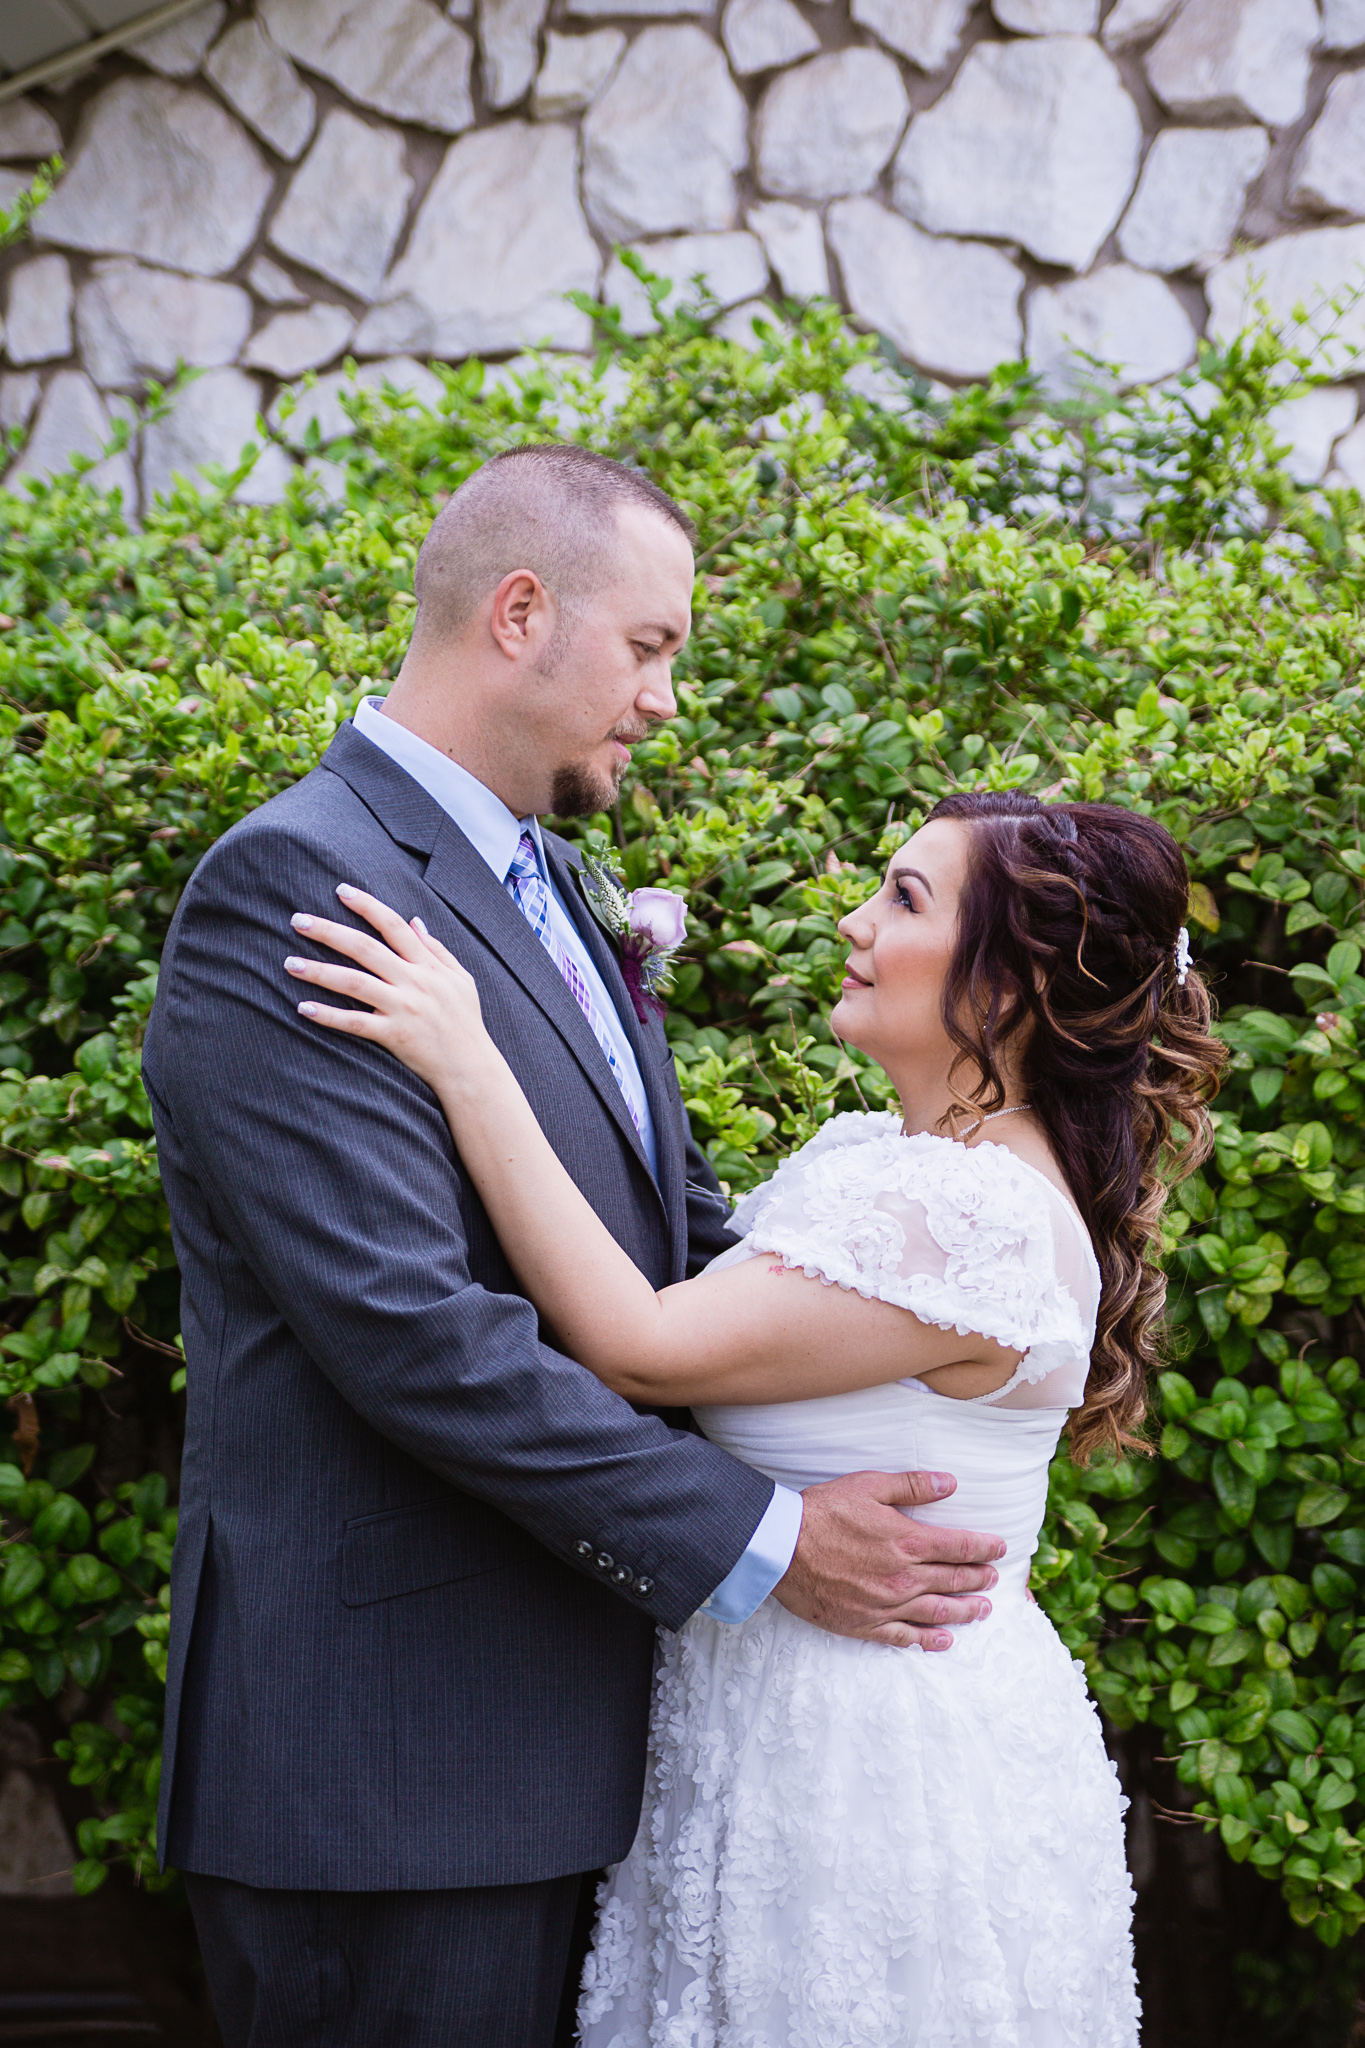 Bride and groom look at each other in front of a garden bush by PMA Photography.